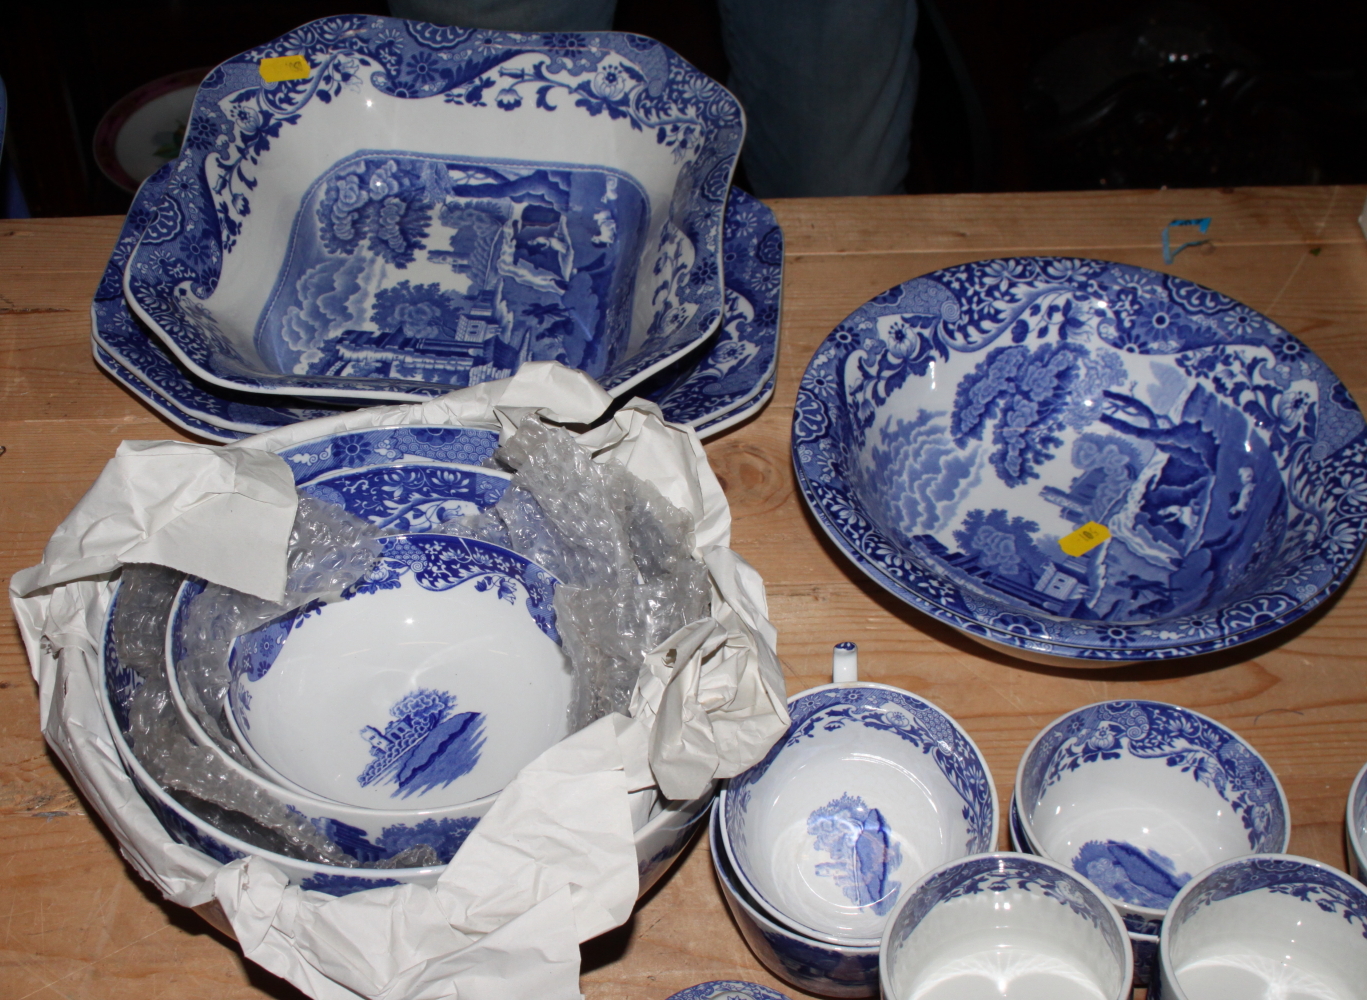 A Copeland Spode "Italian" pattern combination service, including bowls, teapots, teacups, a - Image 12 of 47